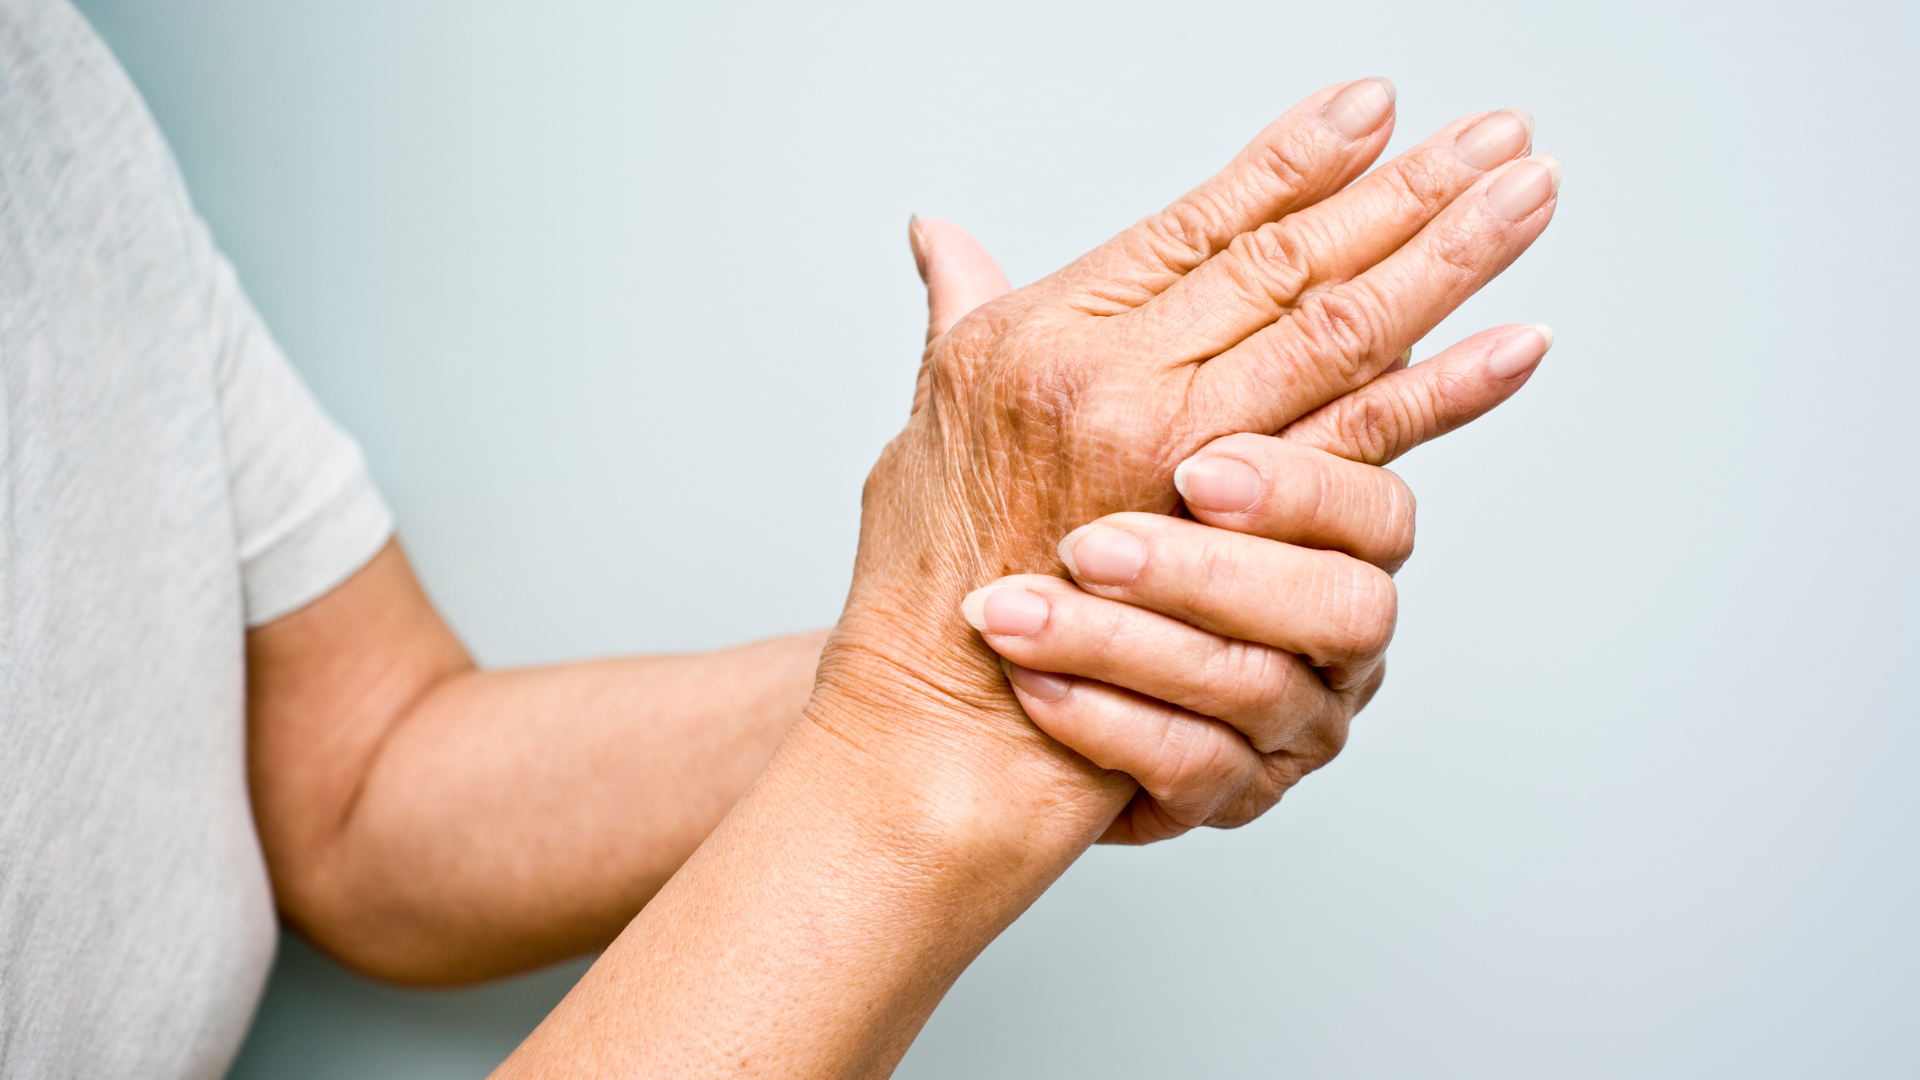 Natural Remedies for Arthritic Hand Pain